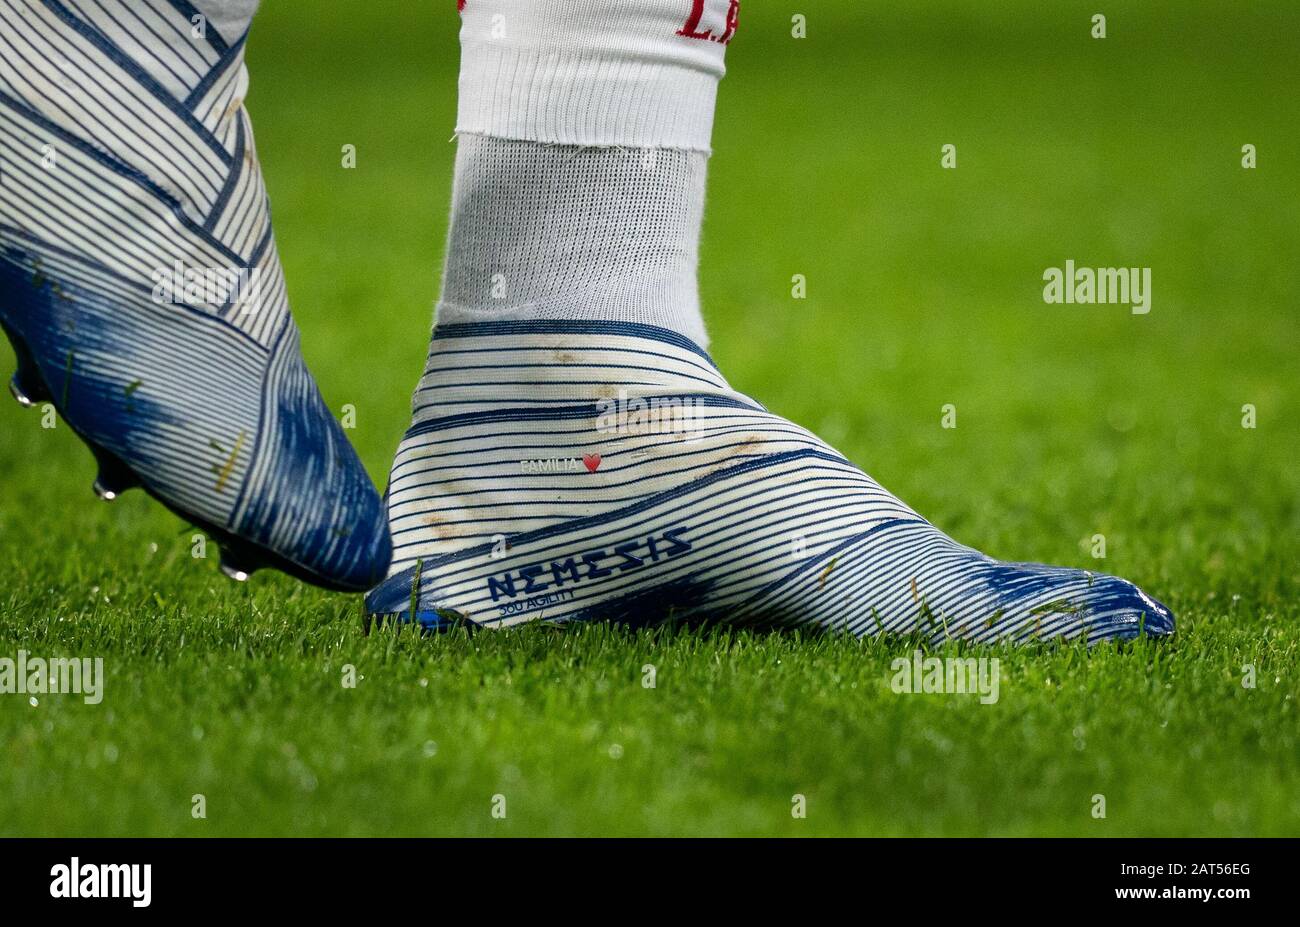 London, UK. 29th Jan, 2020. The Adidas Nemesis football boots of Roberto  Firmino of Liverpool displaying FAMILIA & Love Heart during the Premier  League match between West Ham United and Liverpool at